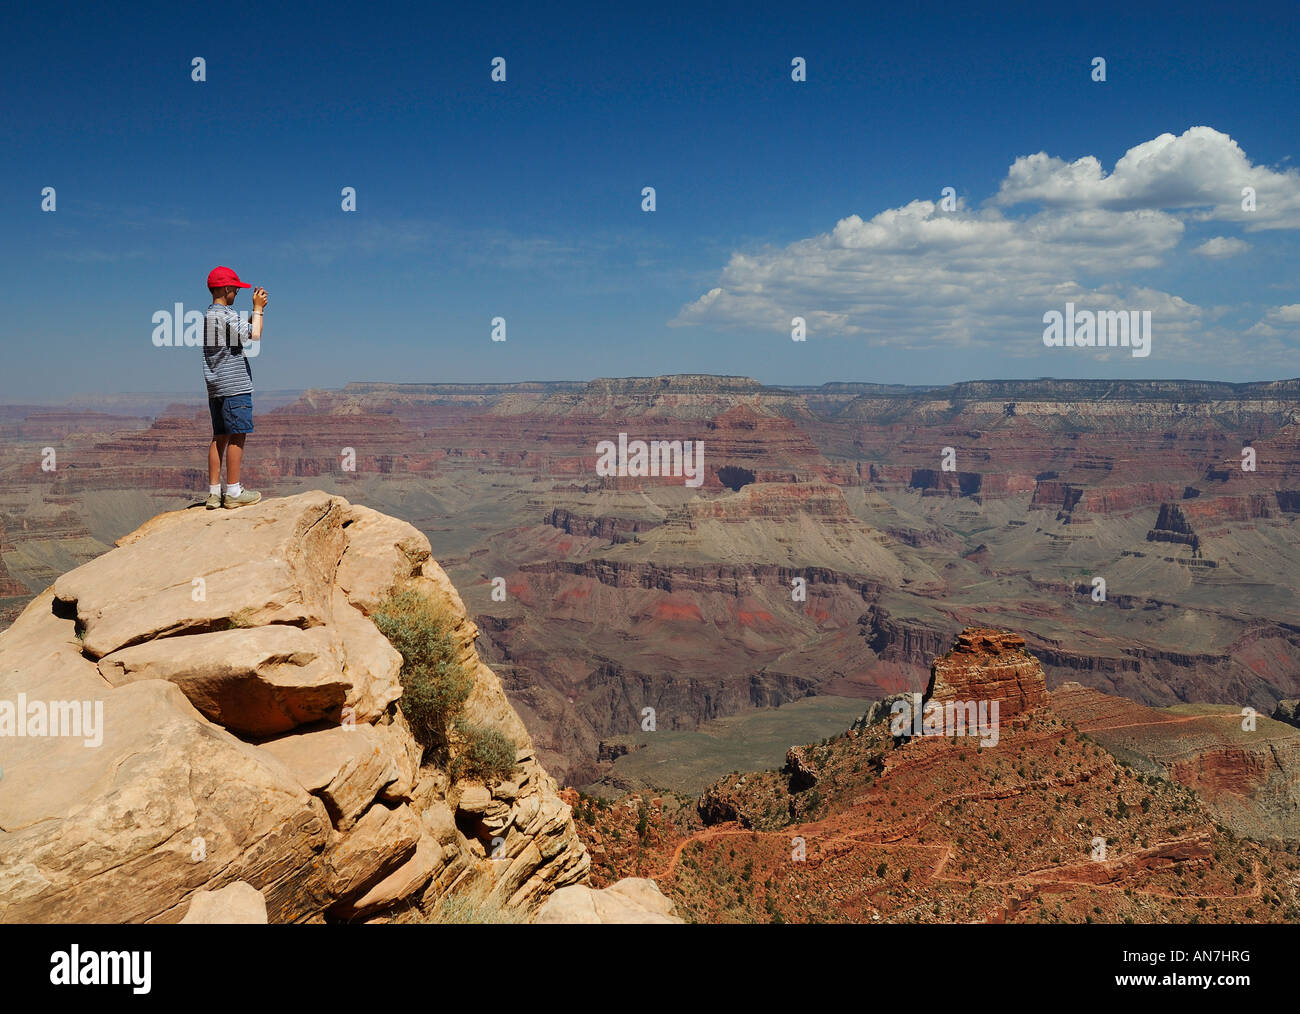 Boy taking landscape picture at Grand Canyon ooh-aah point hiking trail. Stock Photo